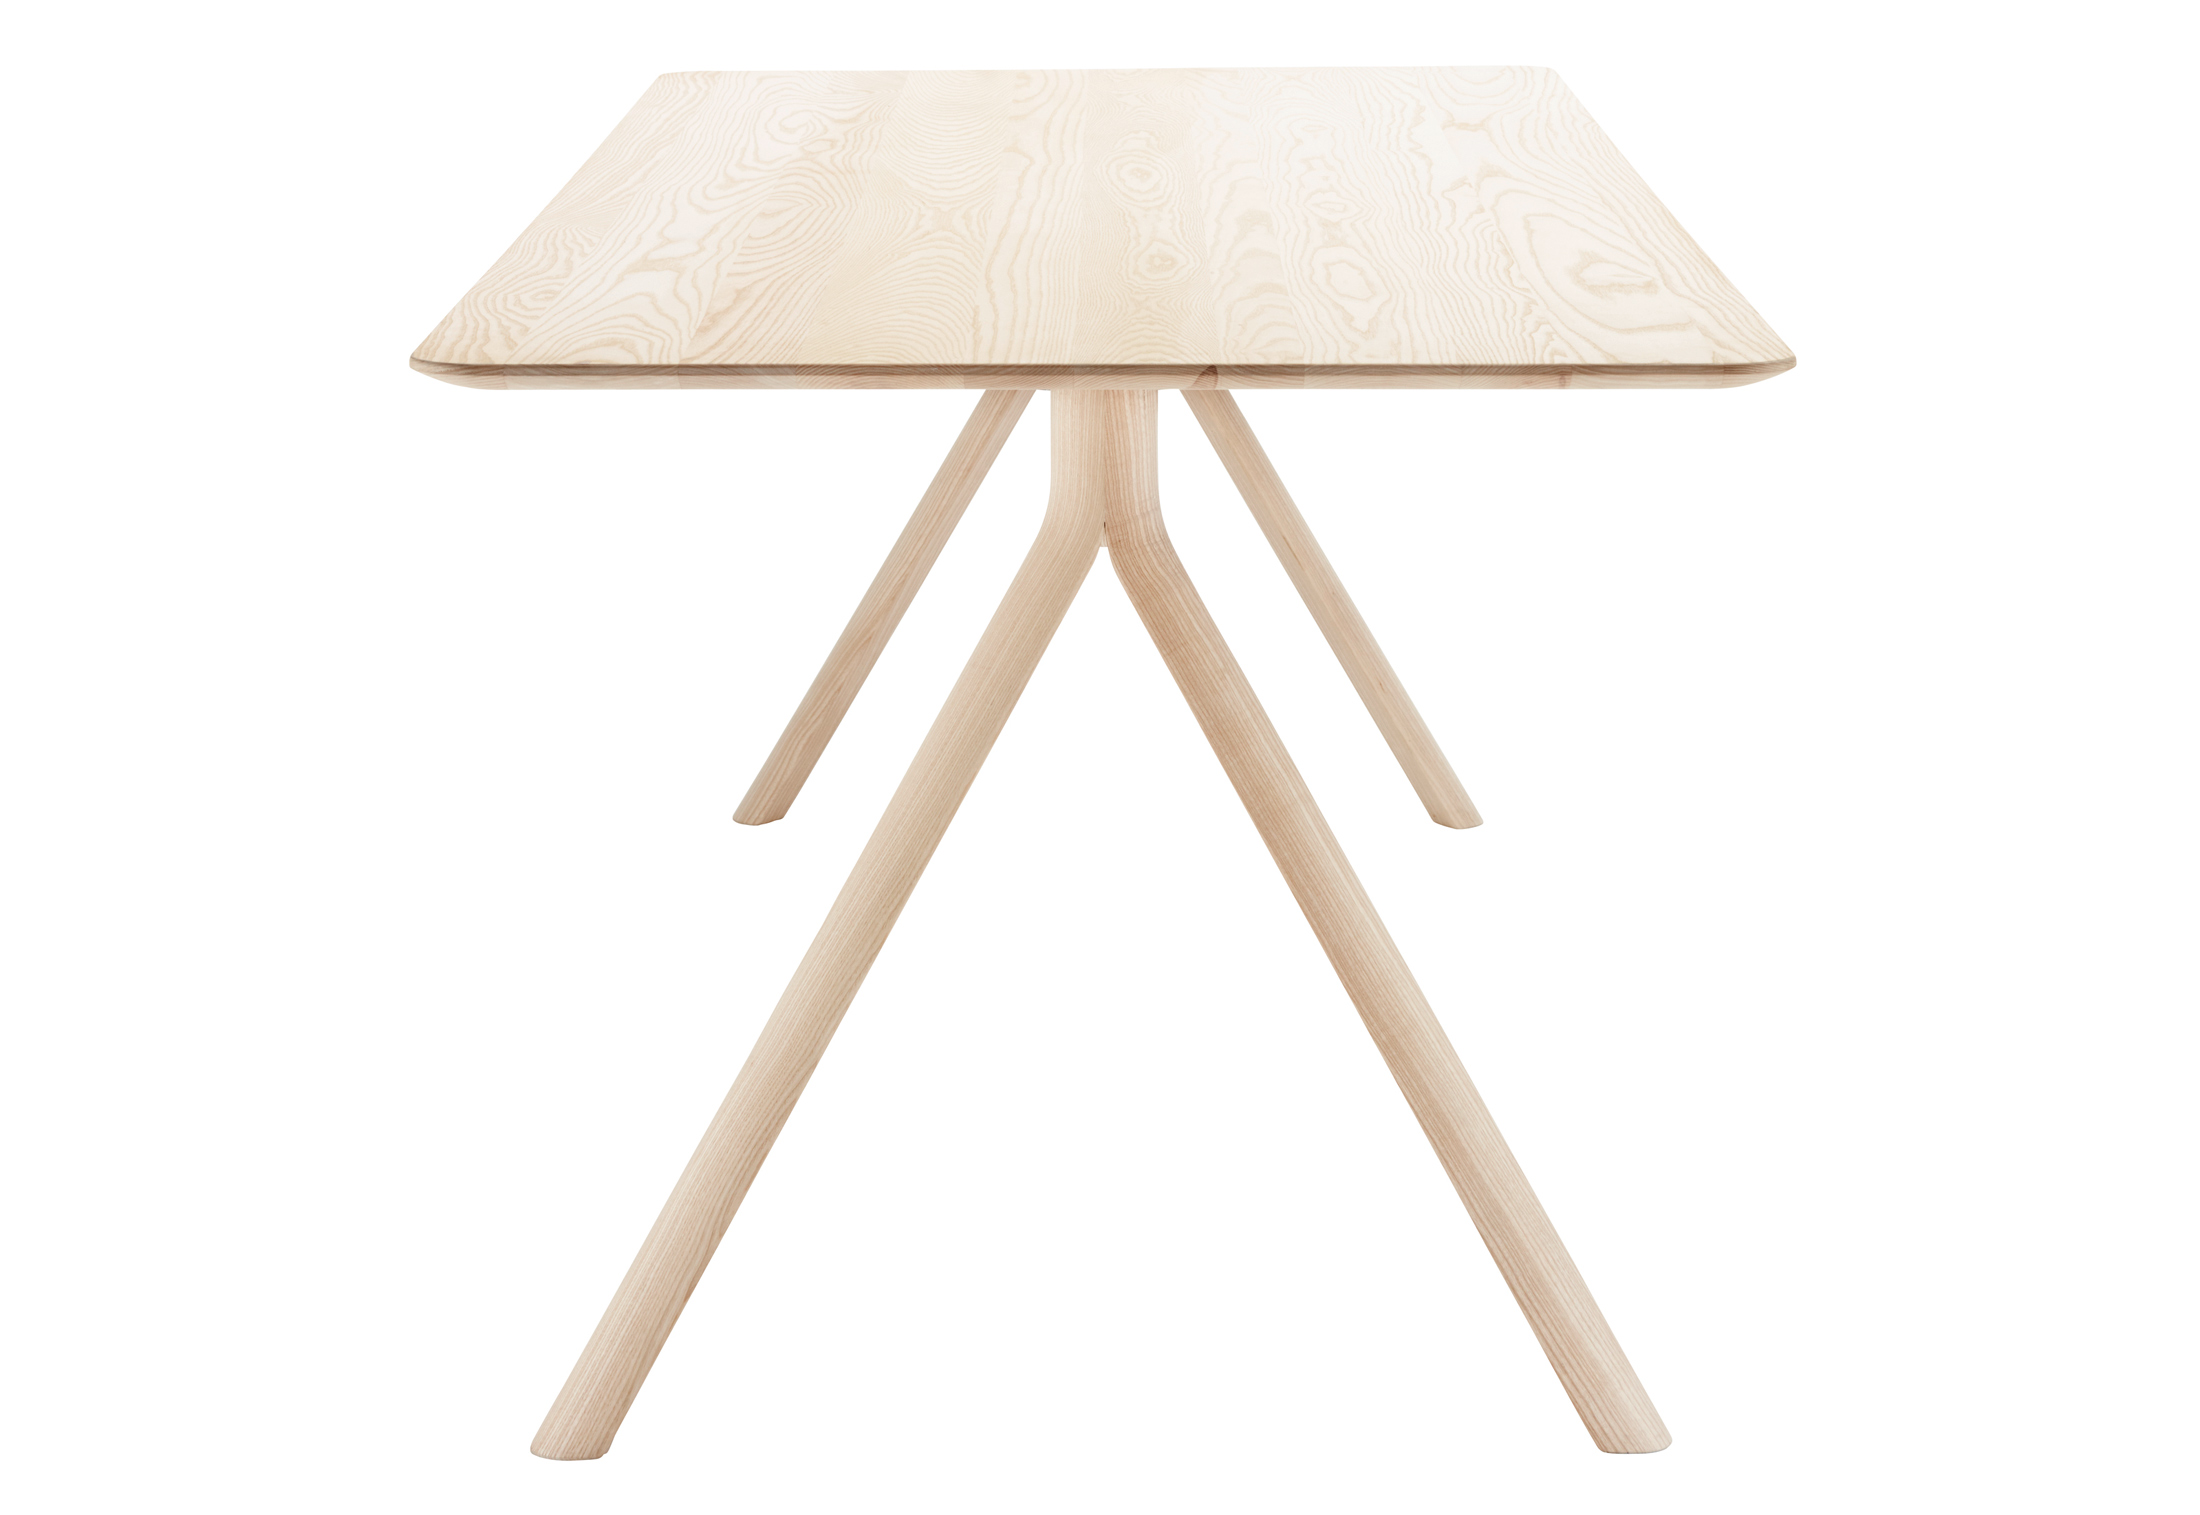 1060 Table by Jorre van Ast for Thonet